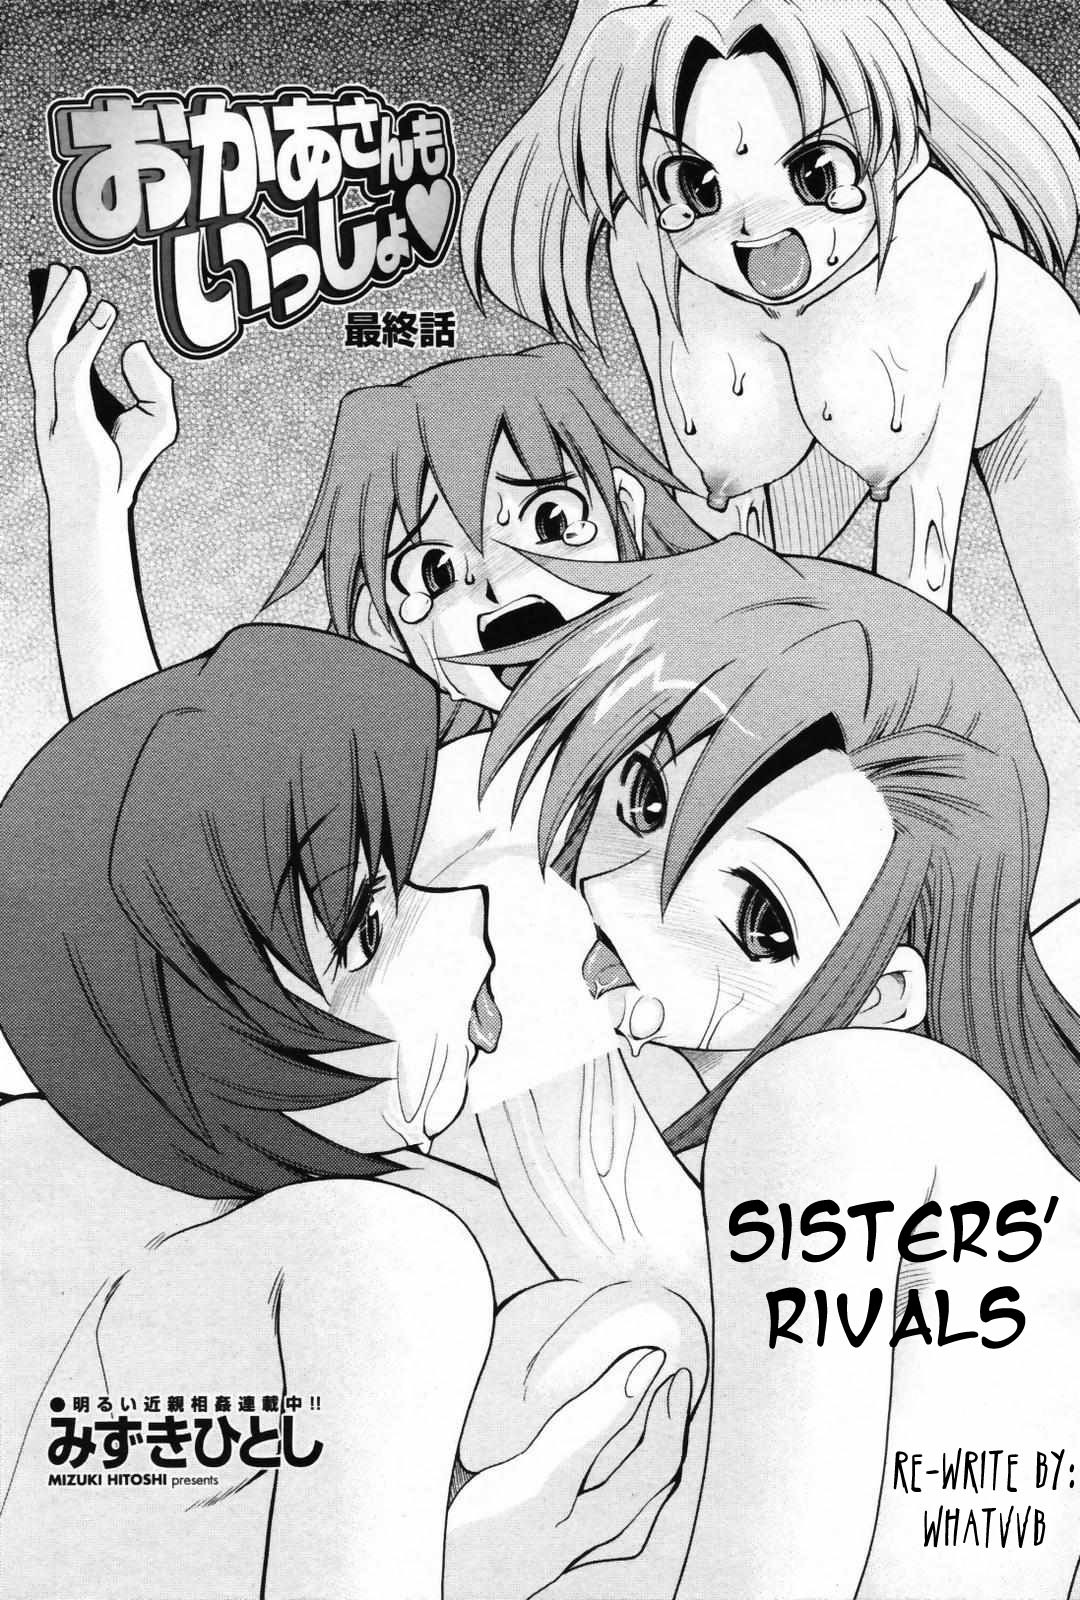 Sisters' Rivals [English] [Rewrite] [WhatVVB] page 2 full